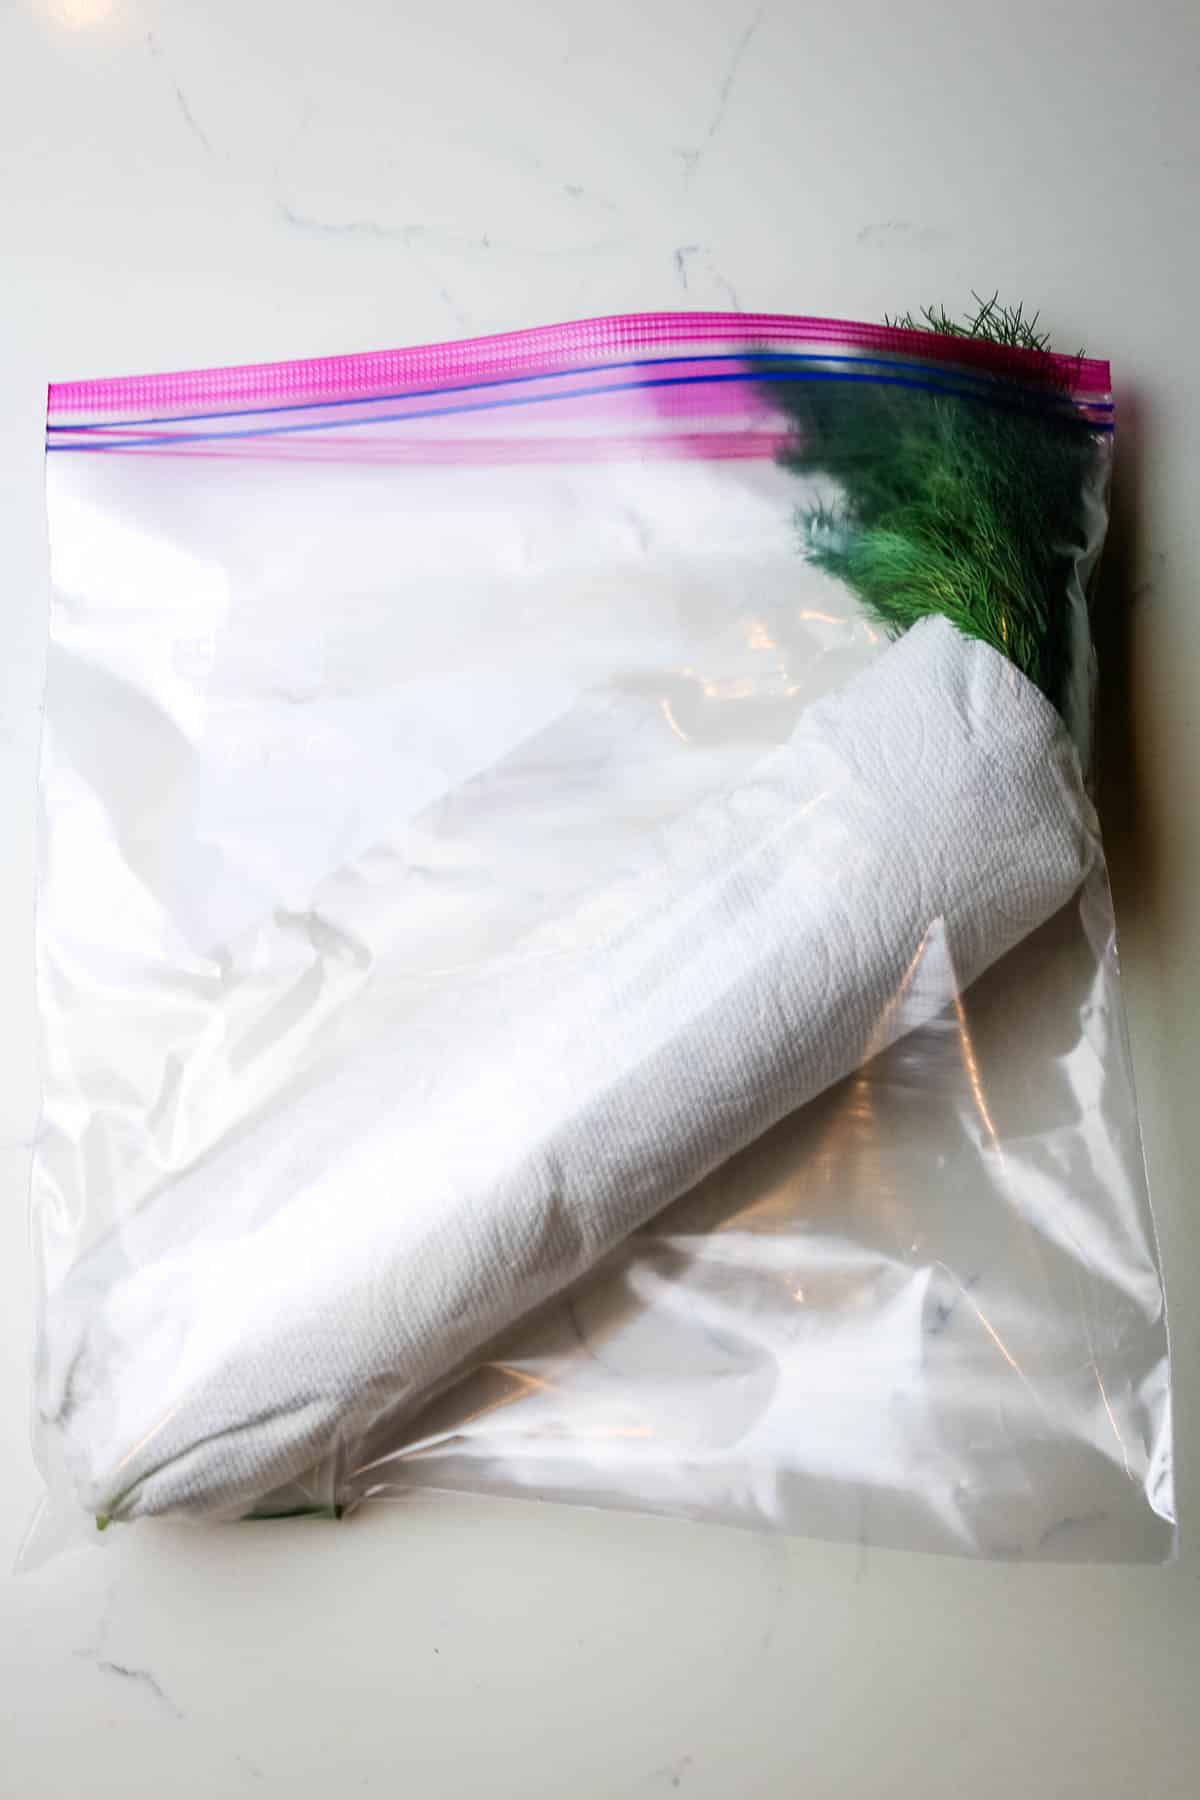 how to store dill in paper towel and freezer bag.